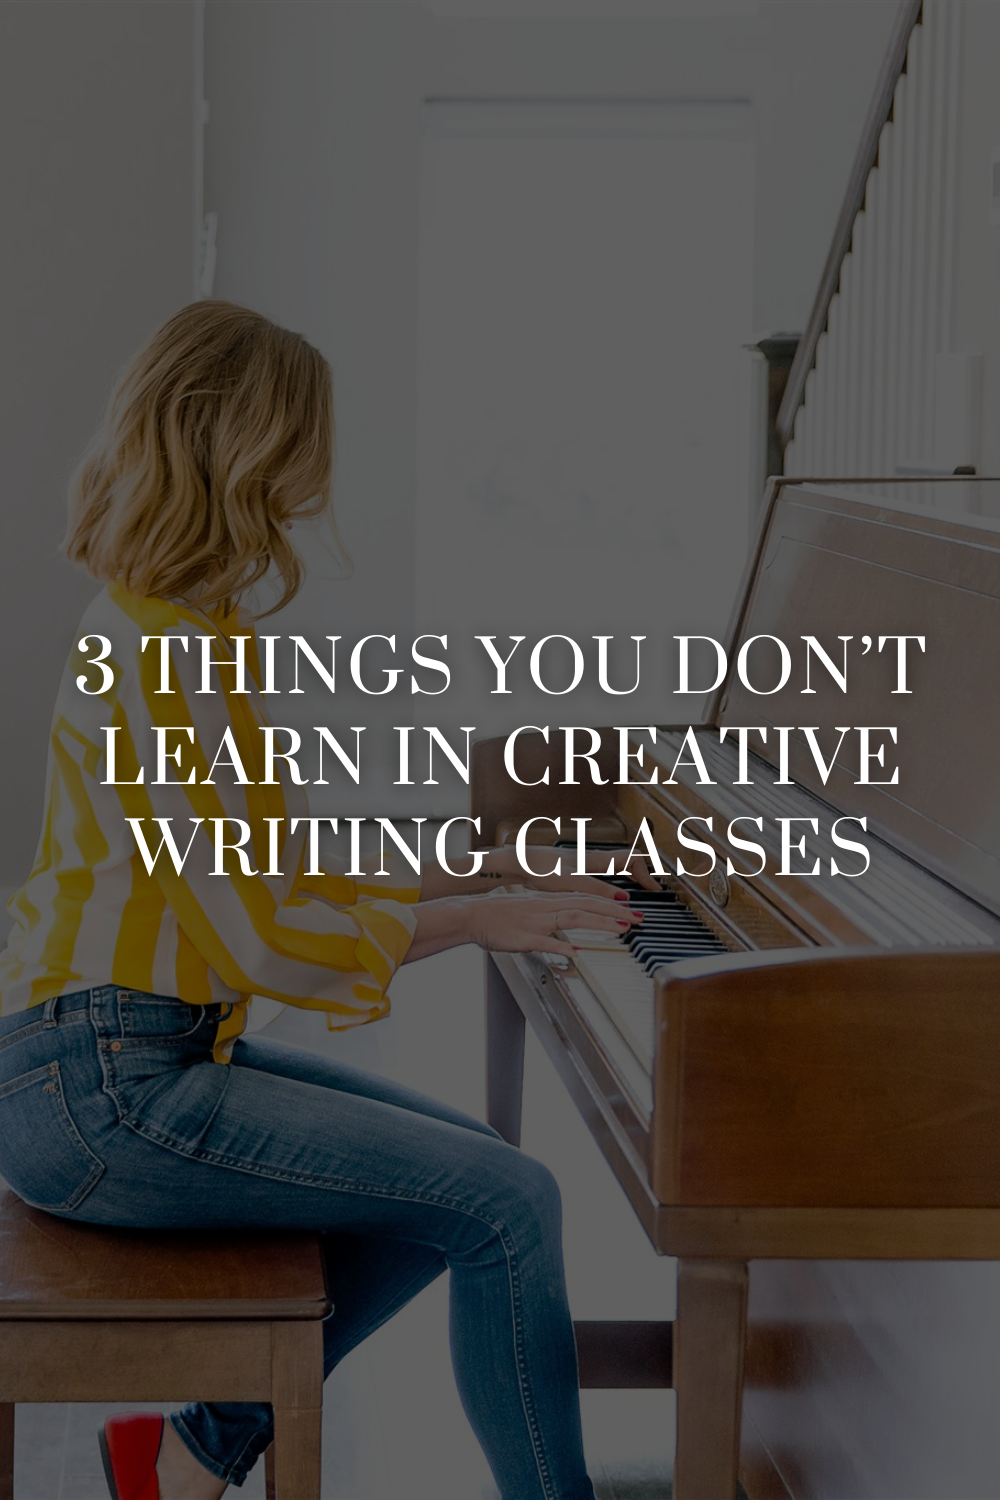 3 Things You Don’t Learn in Creative Writing Classes